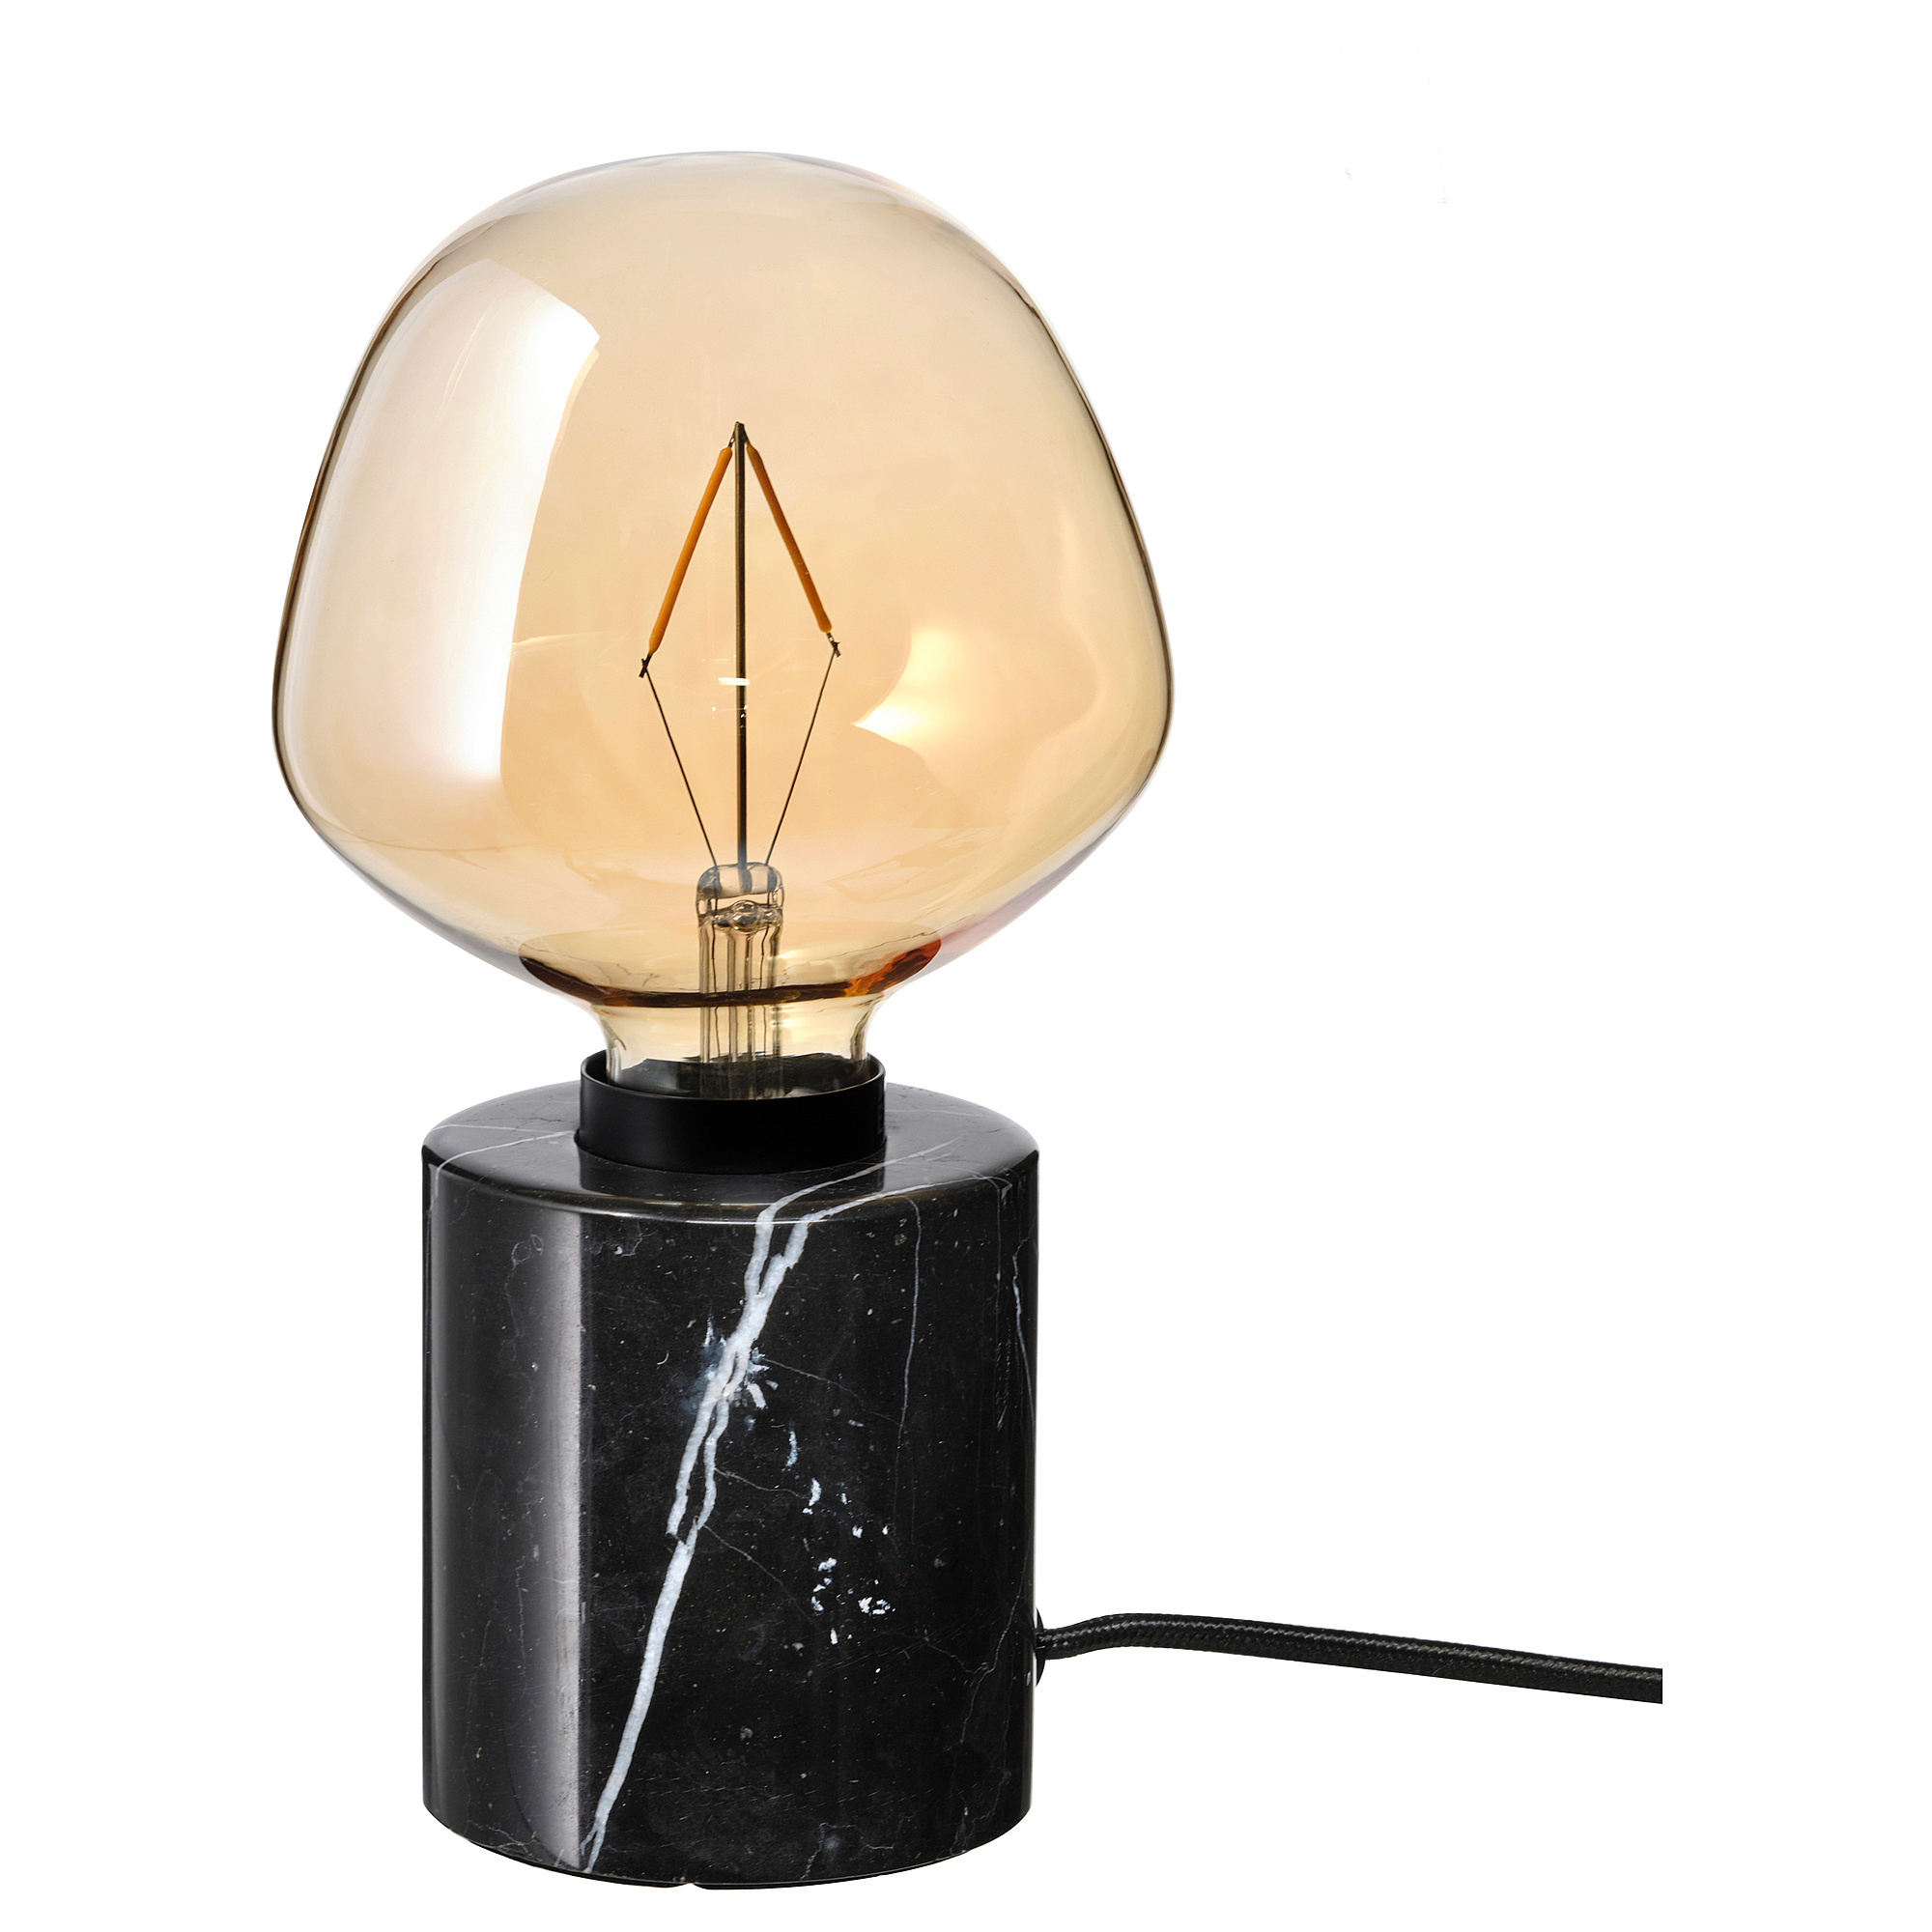 MARKFROST/MOLNART table lamp with light bulb